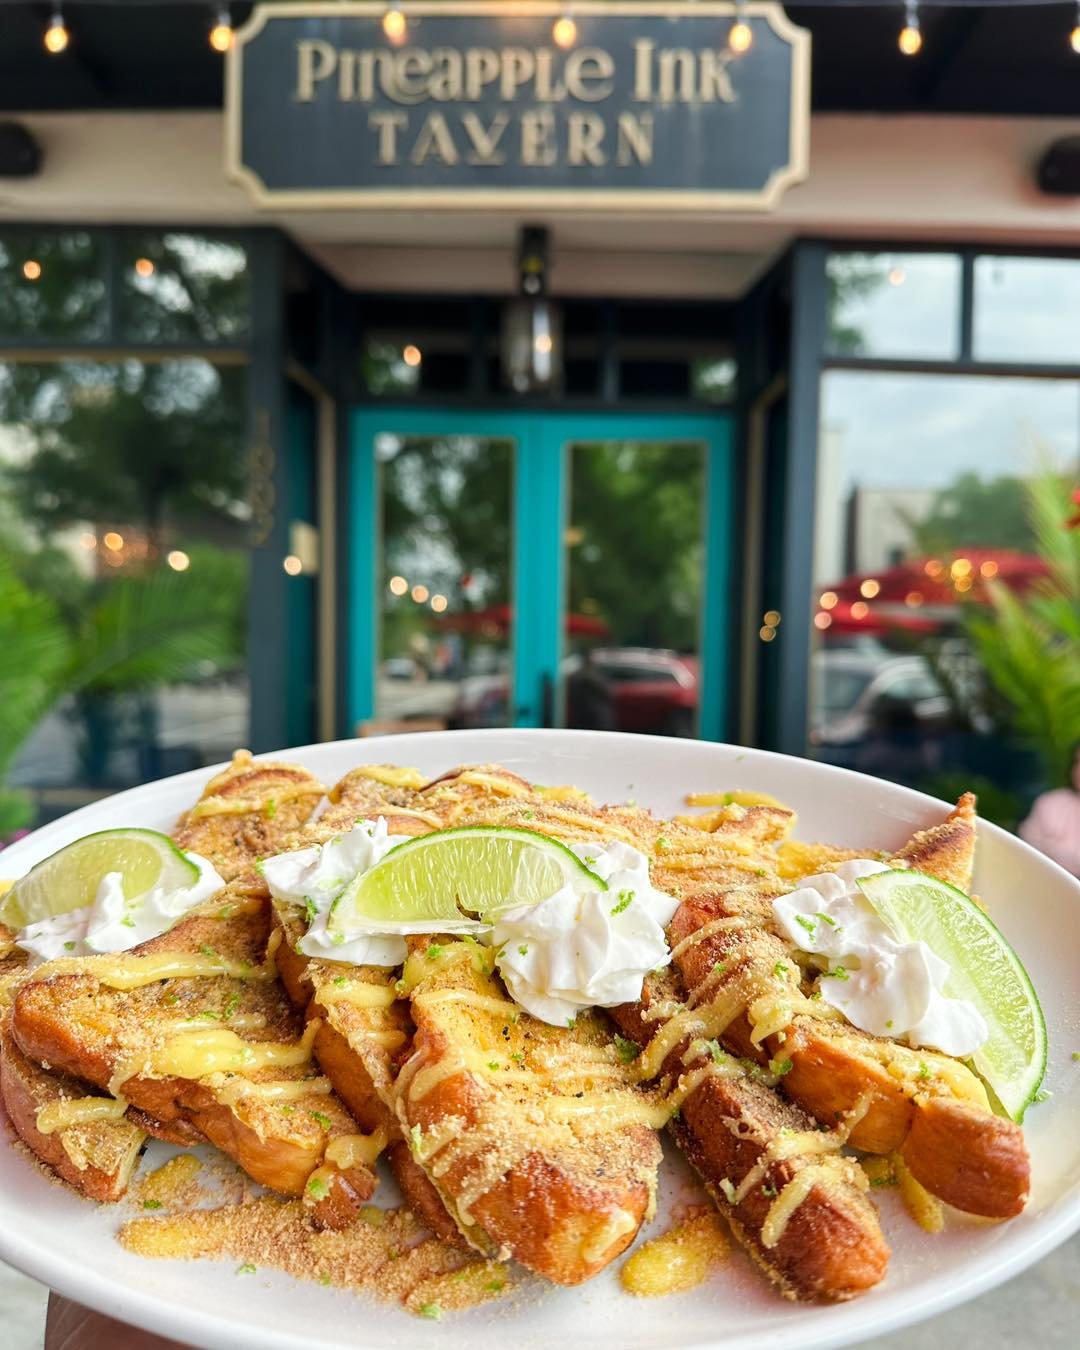 🔑 Unlock your brunch cravings with our tantalizing Key Lime Pie French Toast! 🍋&zwj;🟩 It's a slice of delight in every bite. Don't miss out this weekend at Pineapple Ink Tavern! 🥧☀️ 

#BrunchTime #KeyLimePie #WeekendVibes